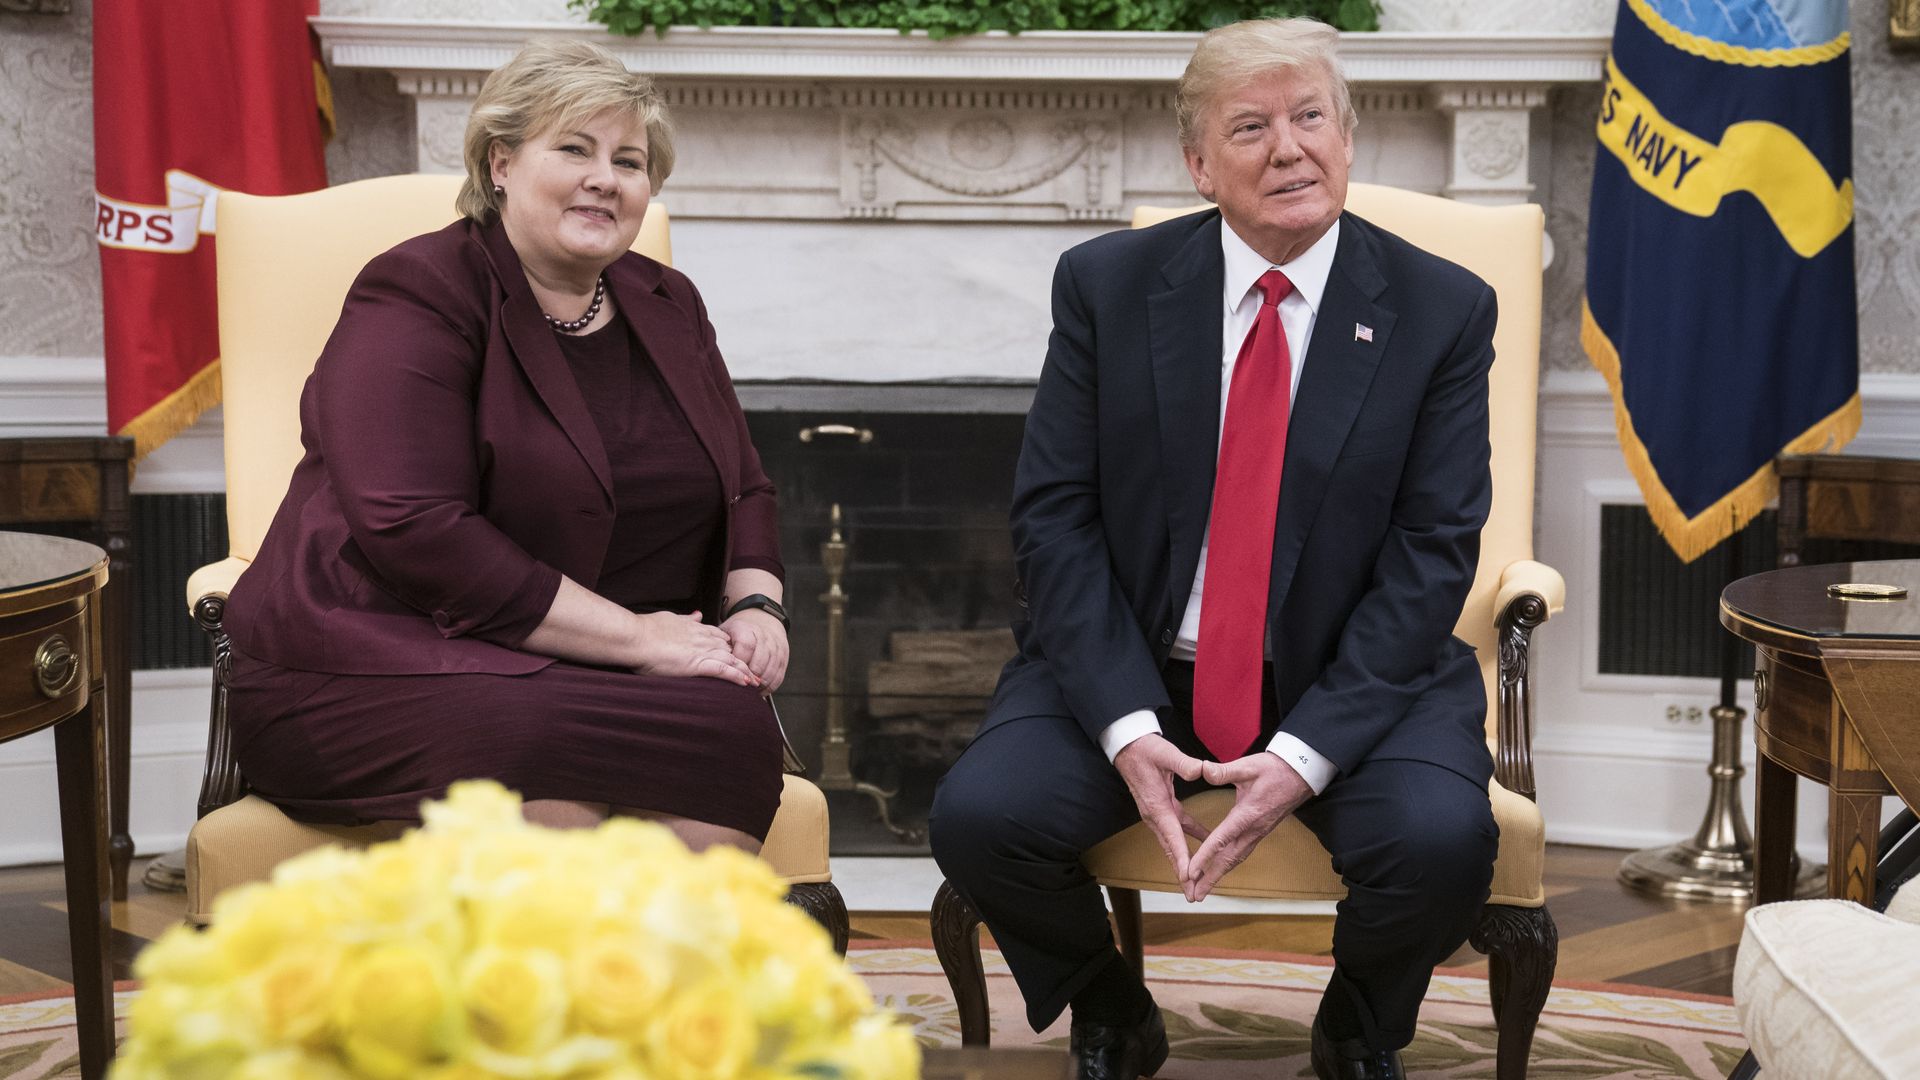 President Trump is seen meeting with Norwegian Prime Minister Erna Solberg in the Ovai Office in 2018.